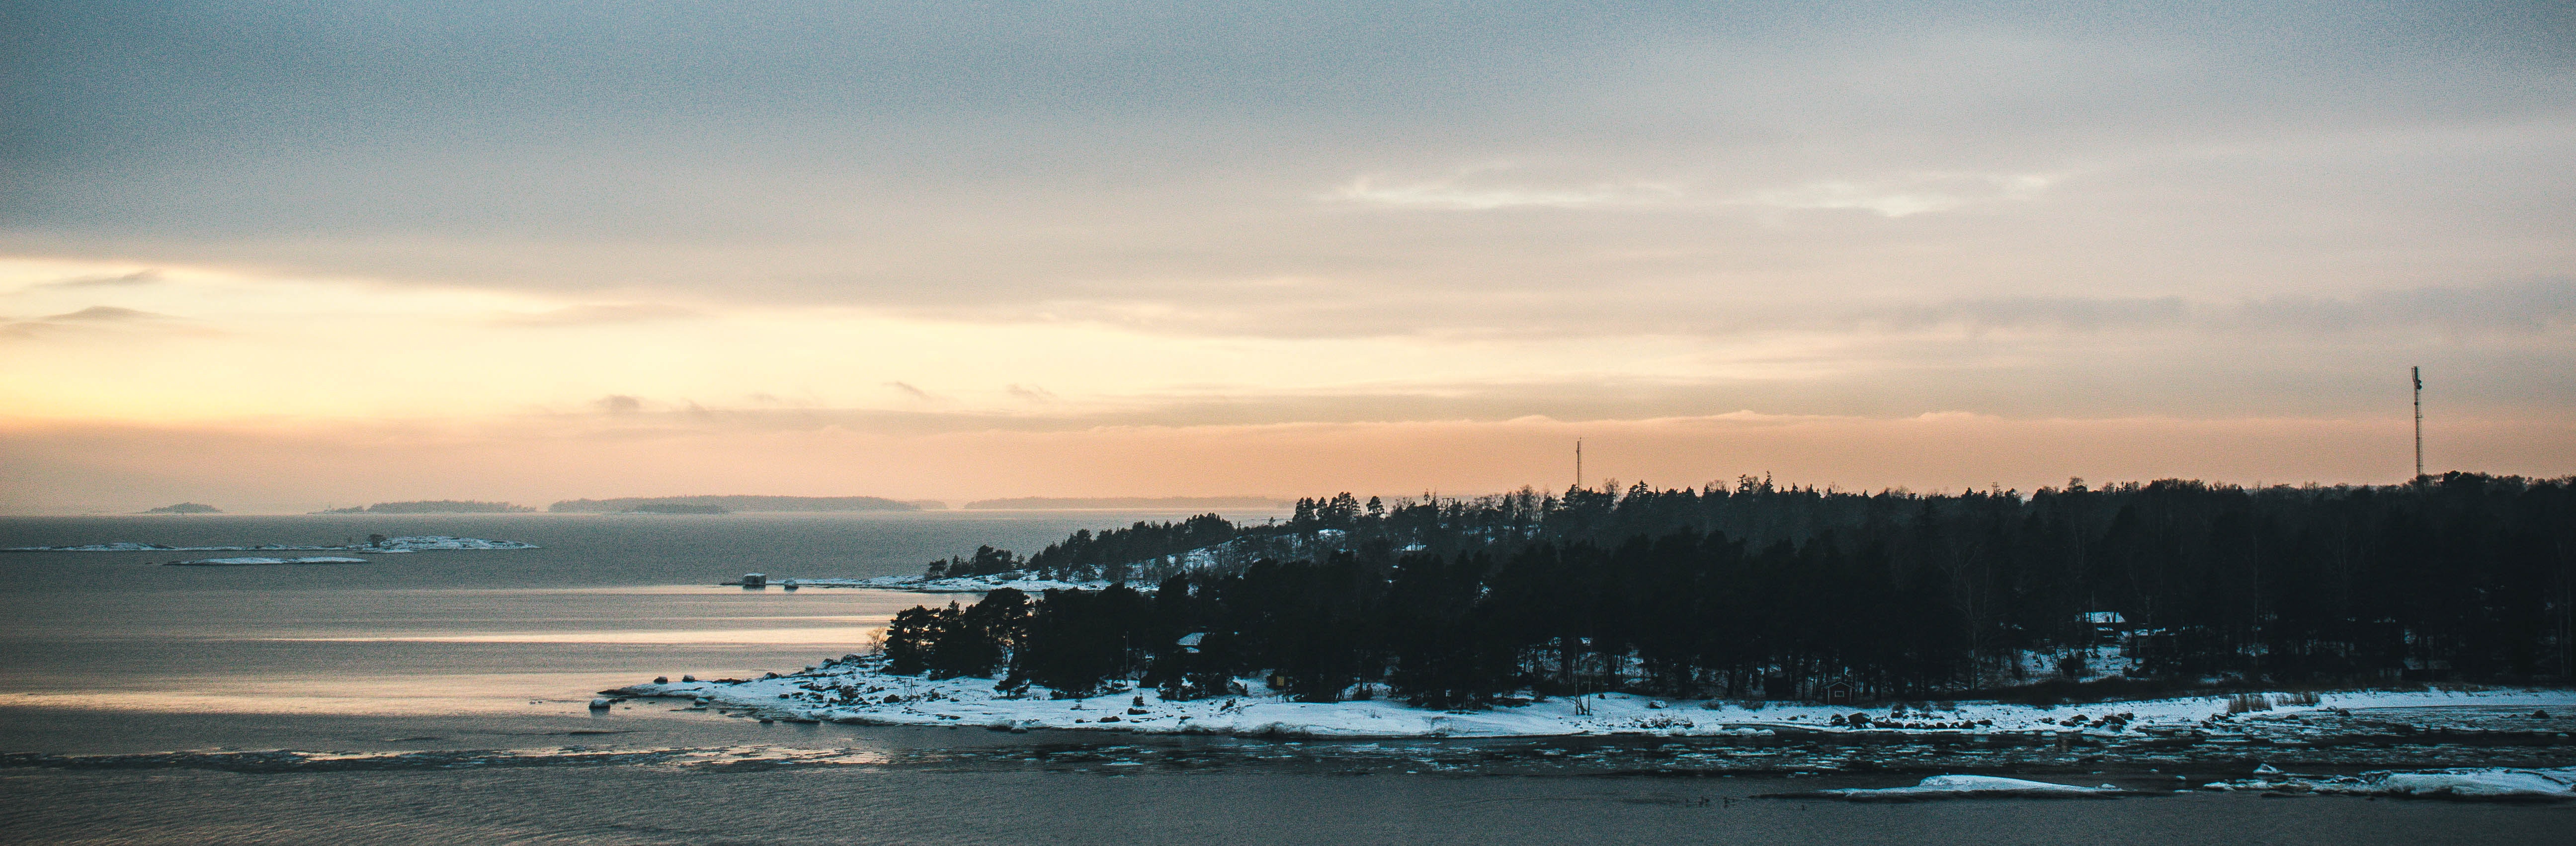 Panoramic photo of island during golden hour